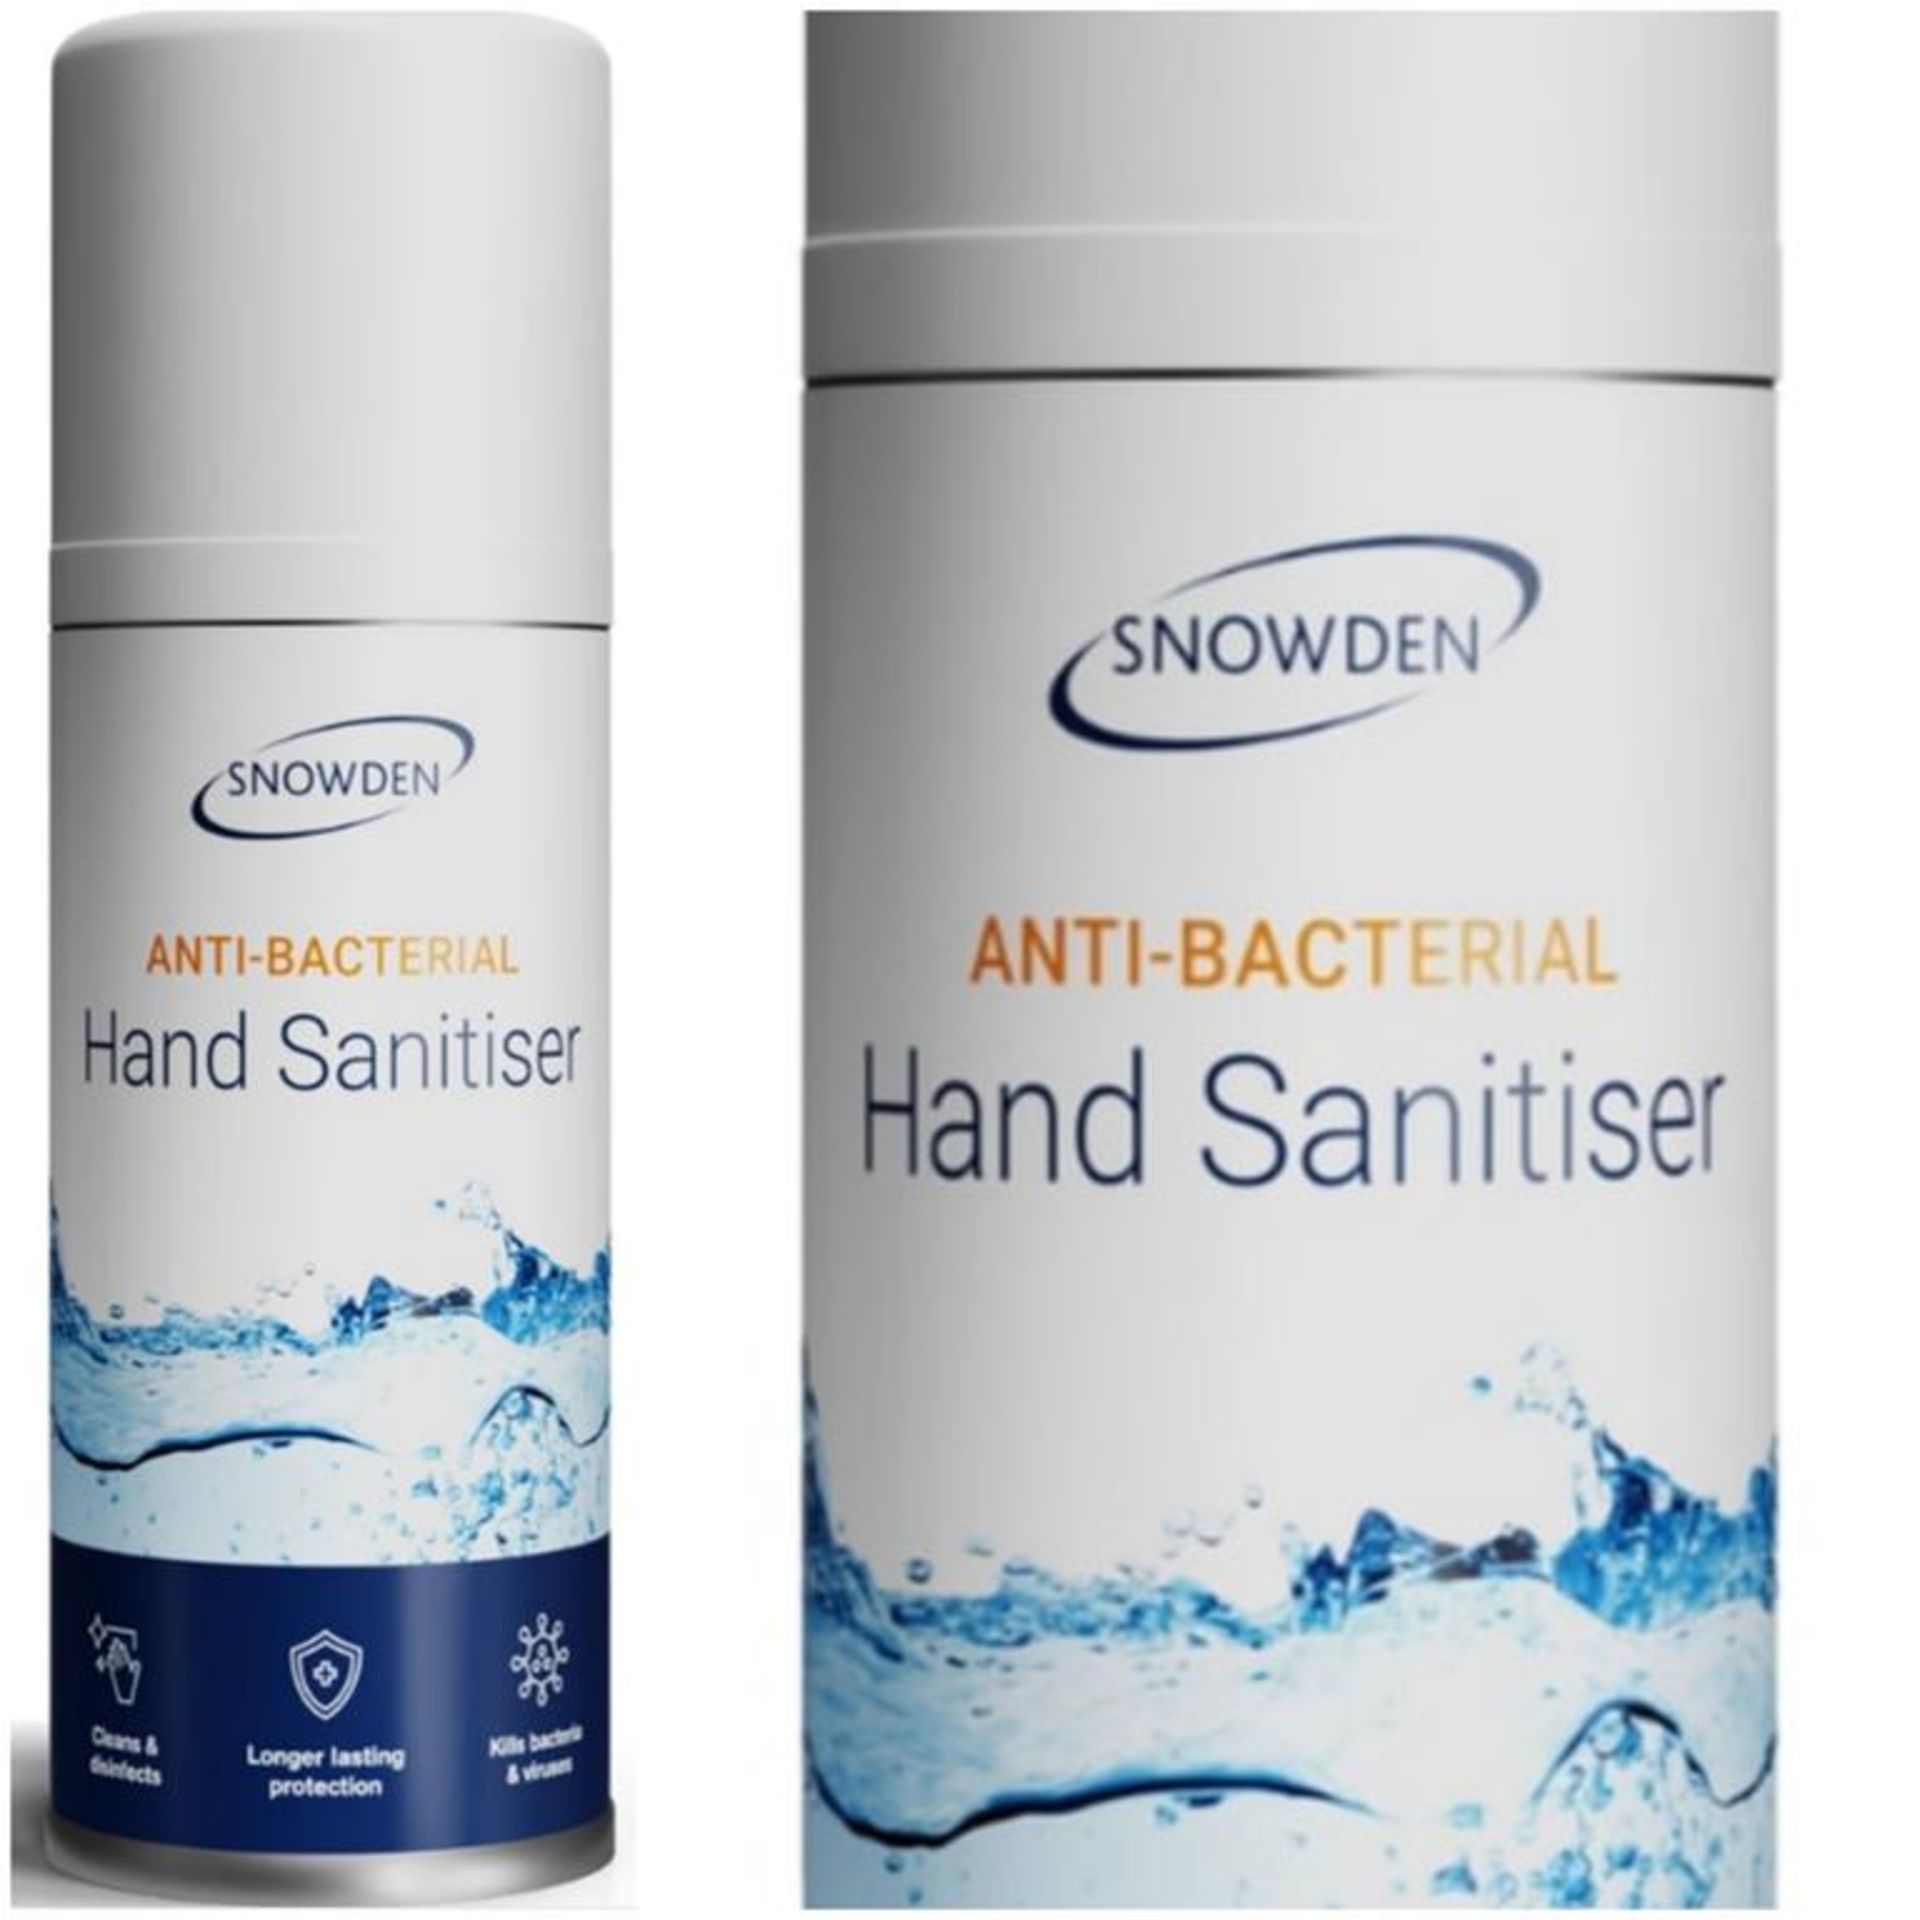 240 Cans of Snowden Sanitiser Spray 125ml - Image 8 of 8